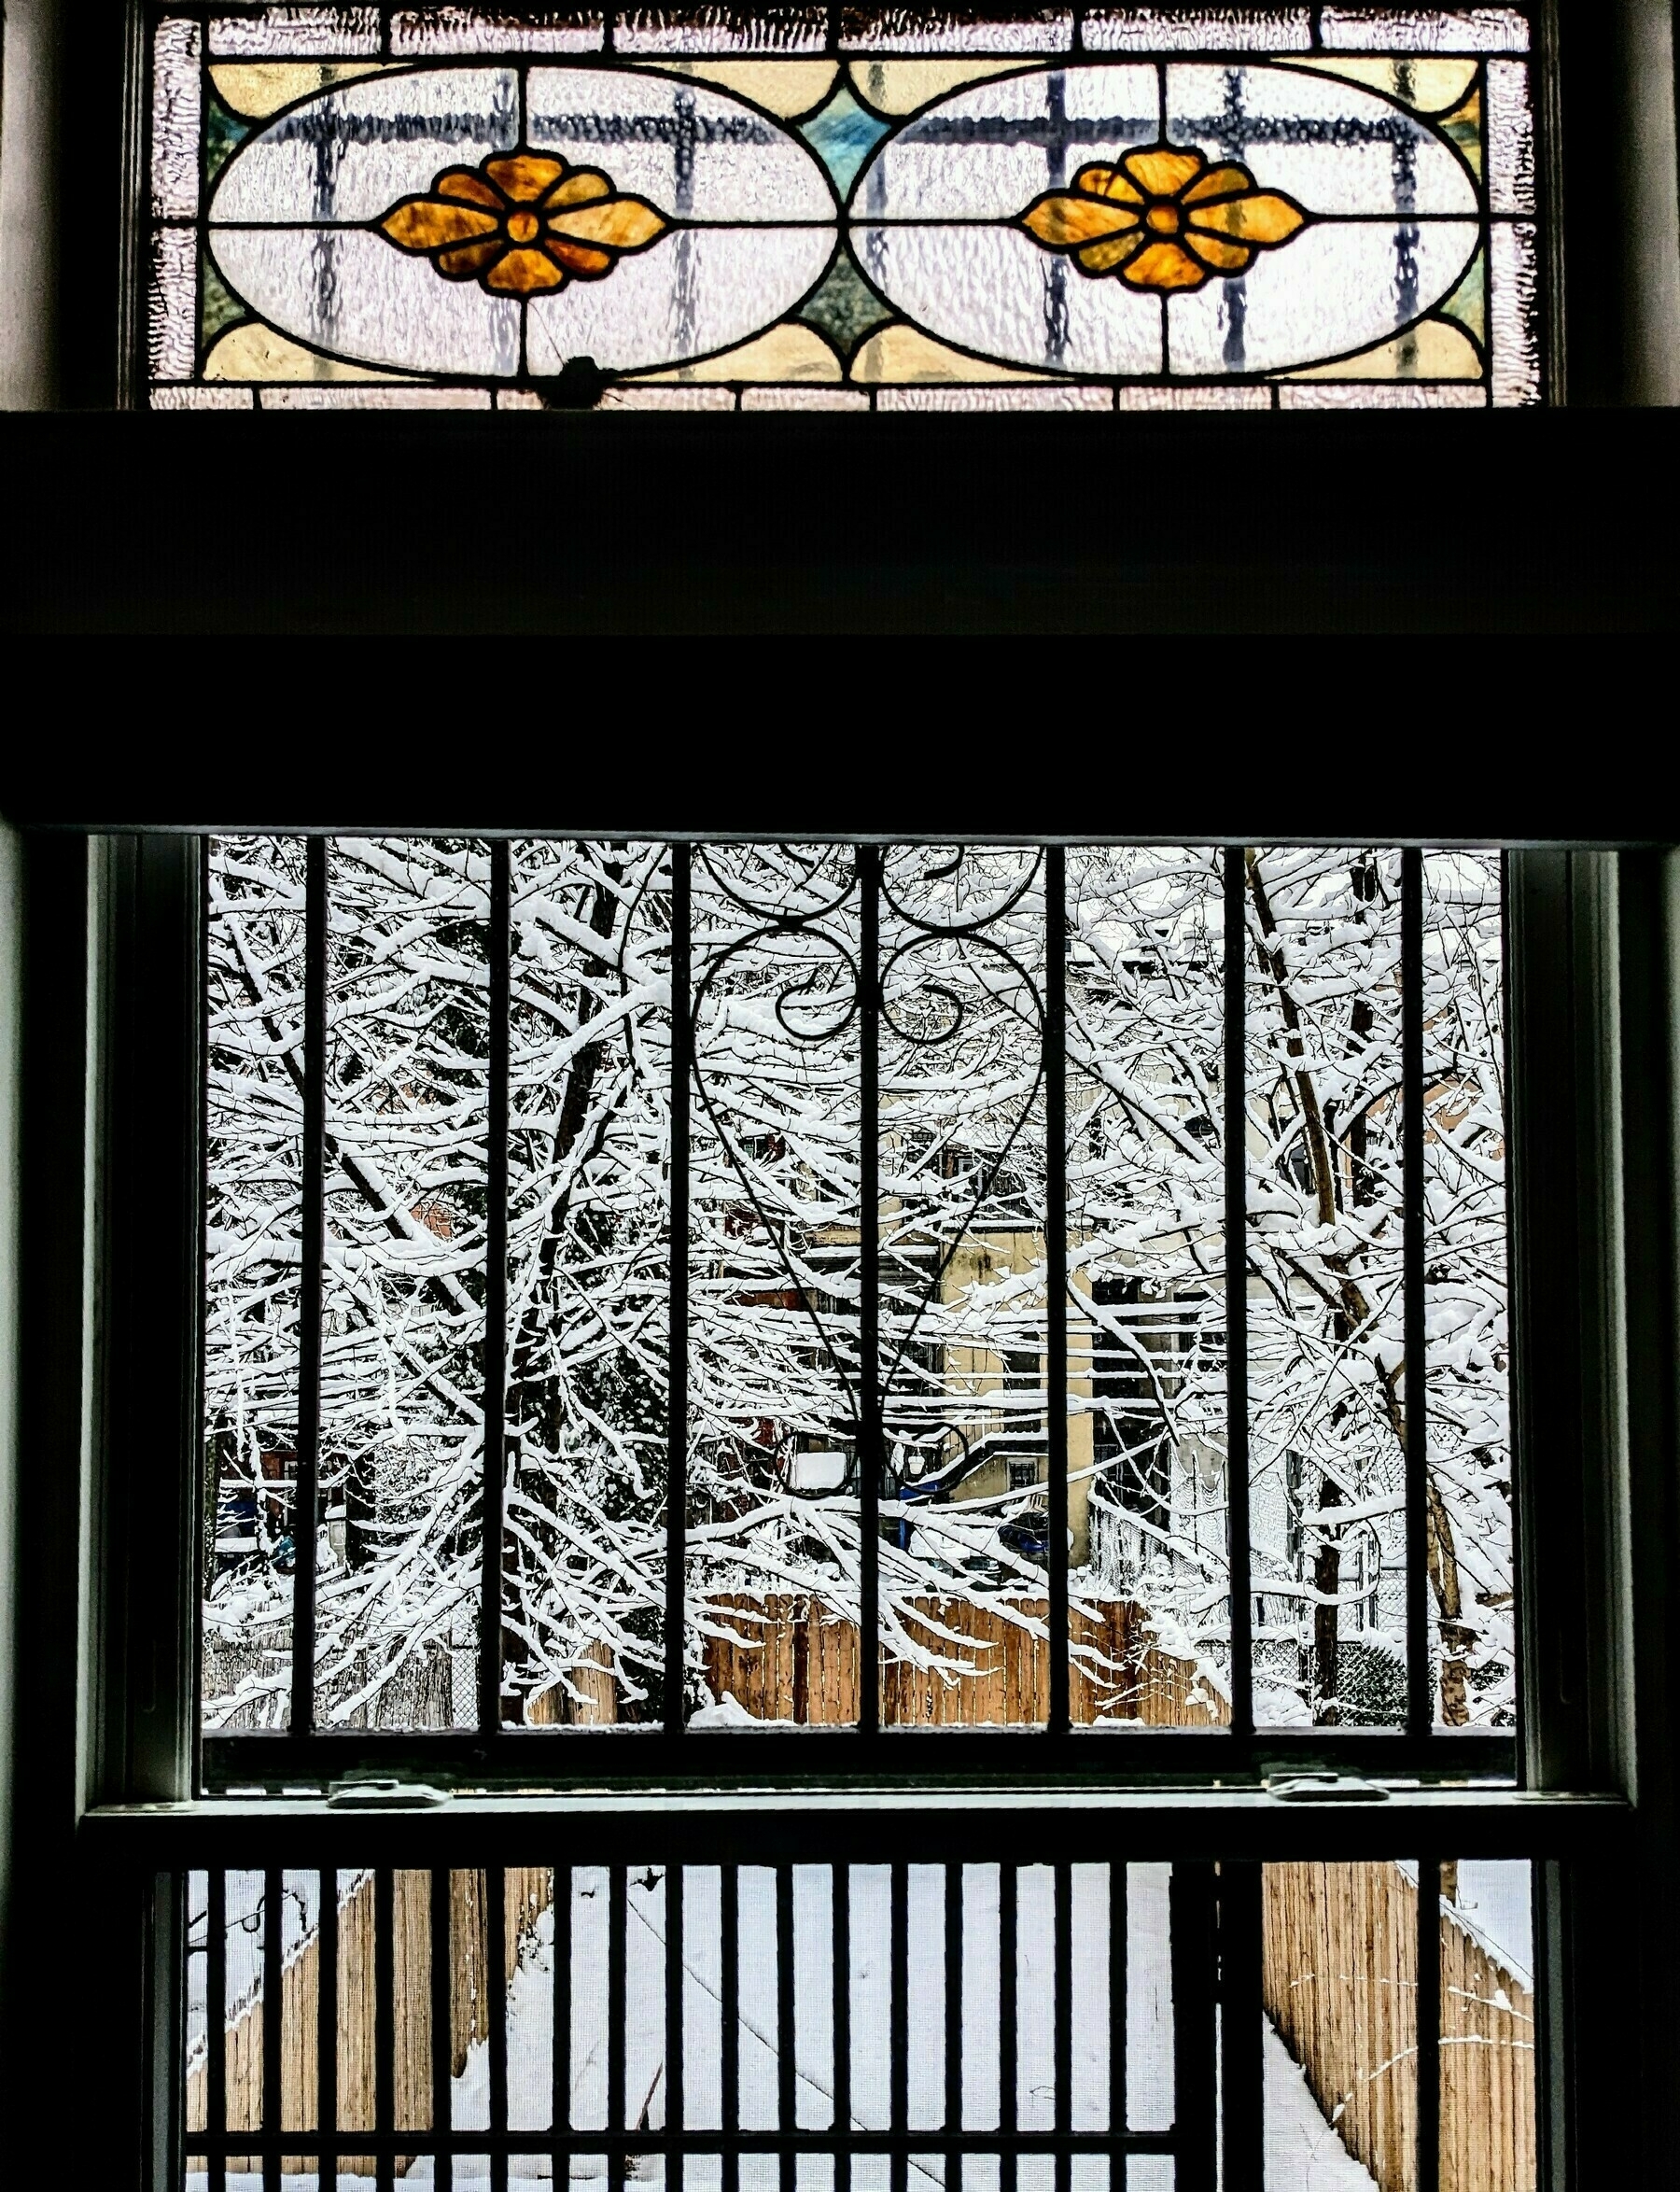 Snow-covered tree branches seen through a window with a grate and stained-glass panels